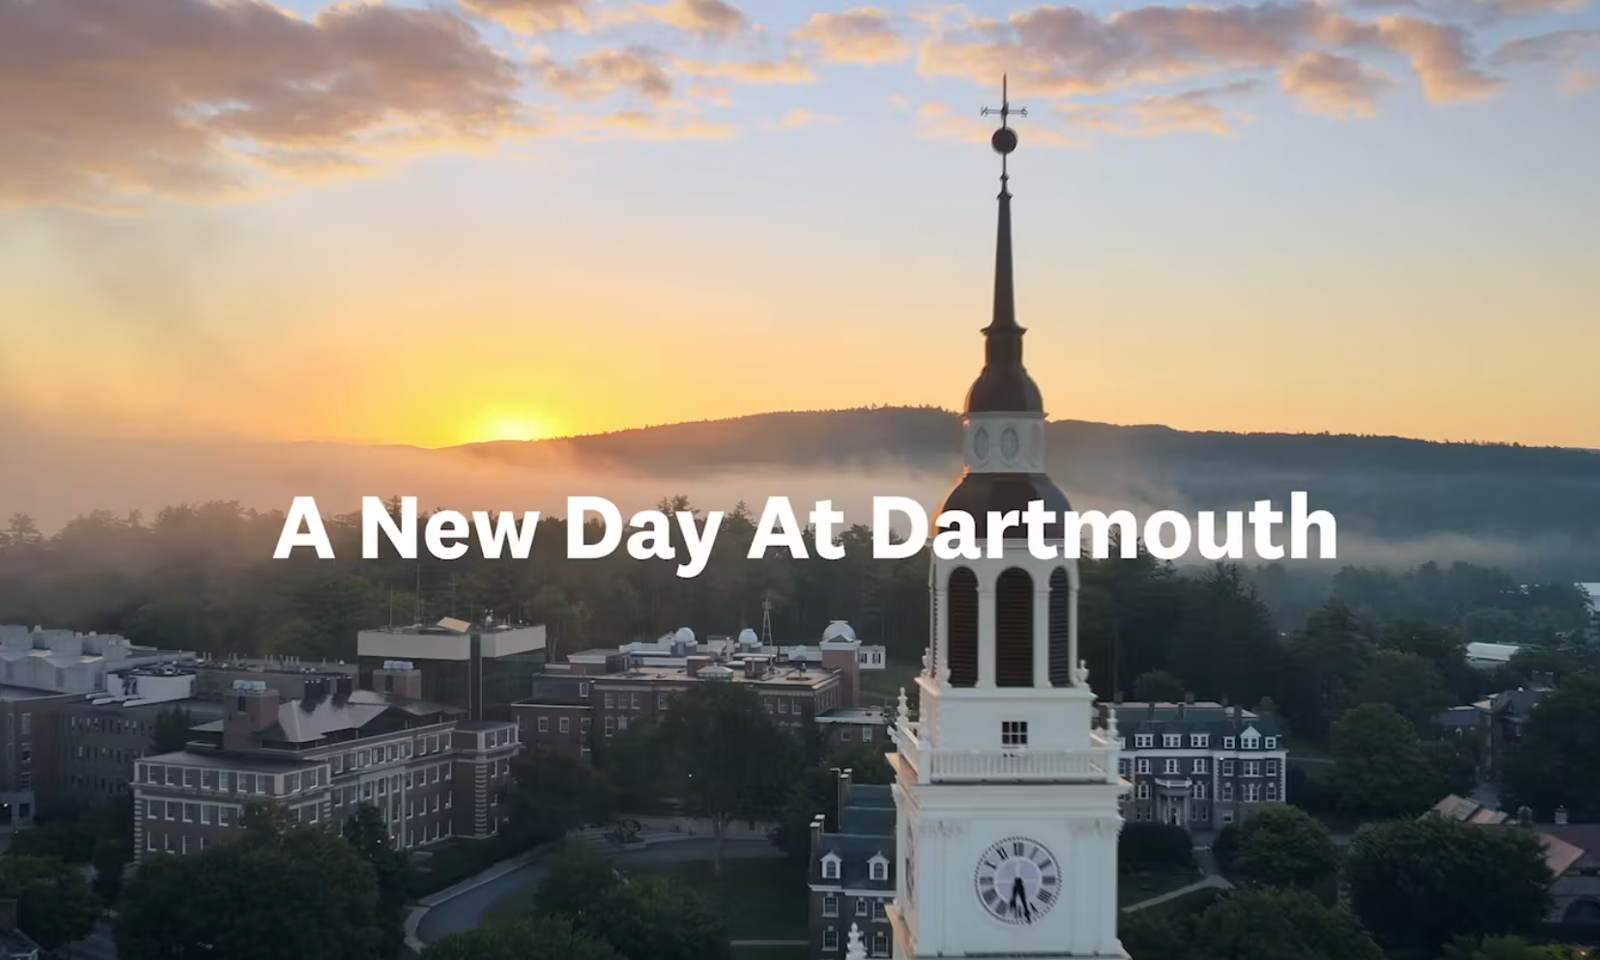 "A New Day at Dartmouth" over Baker Tower